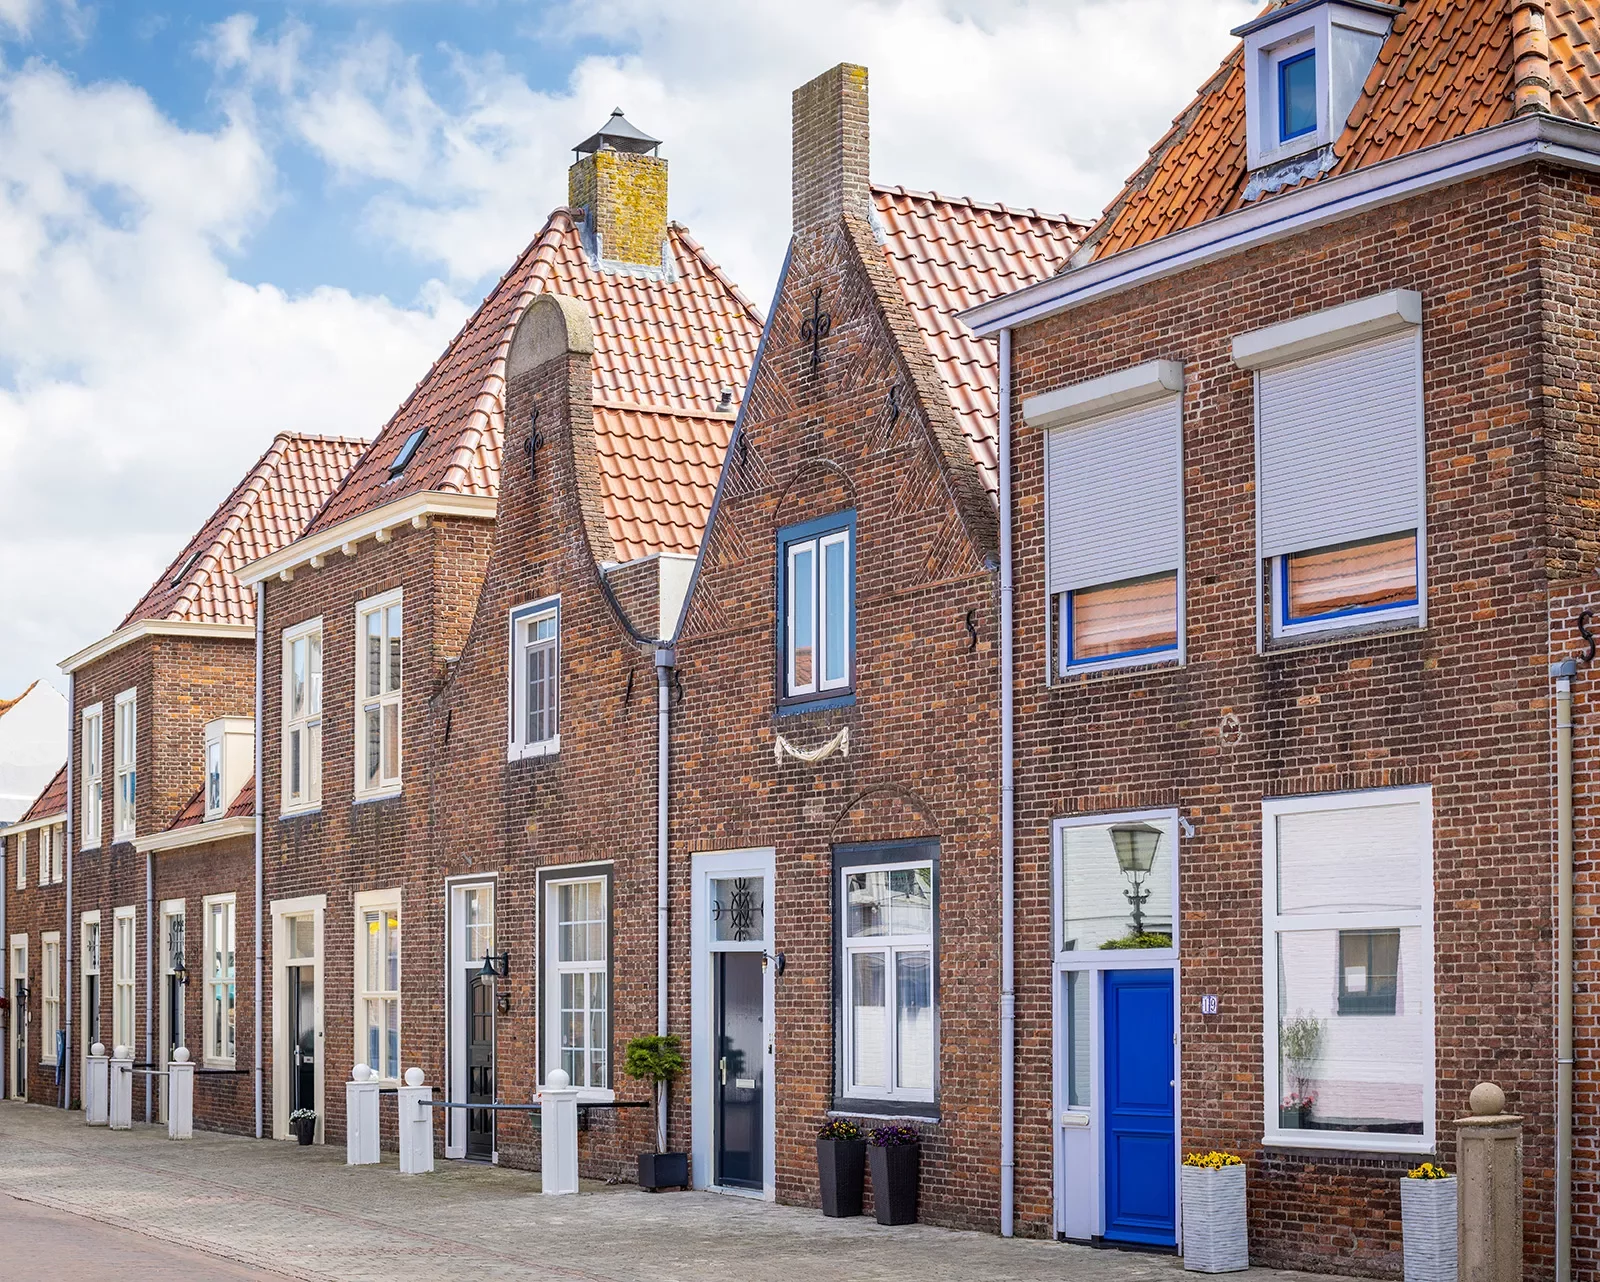 Row of brick houses in the Netherlands